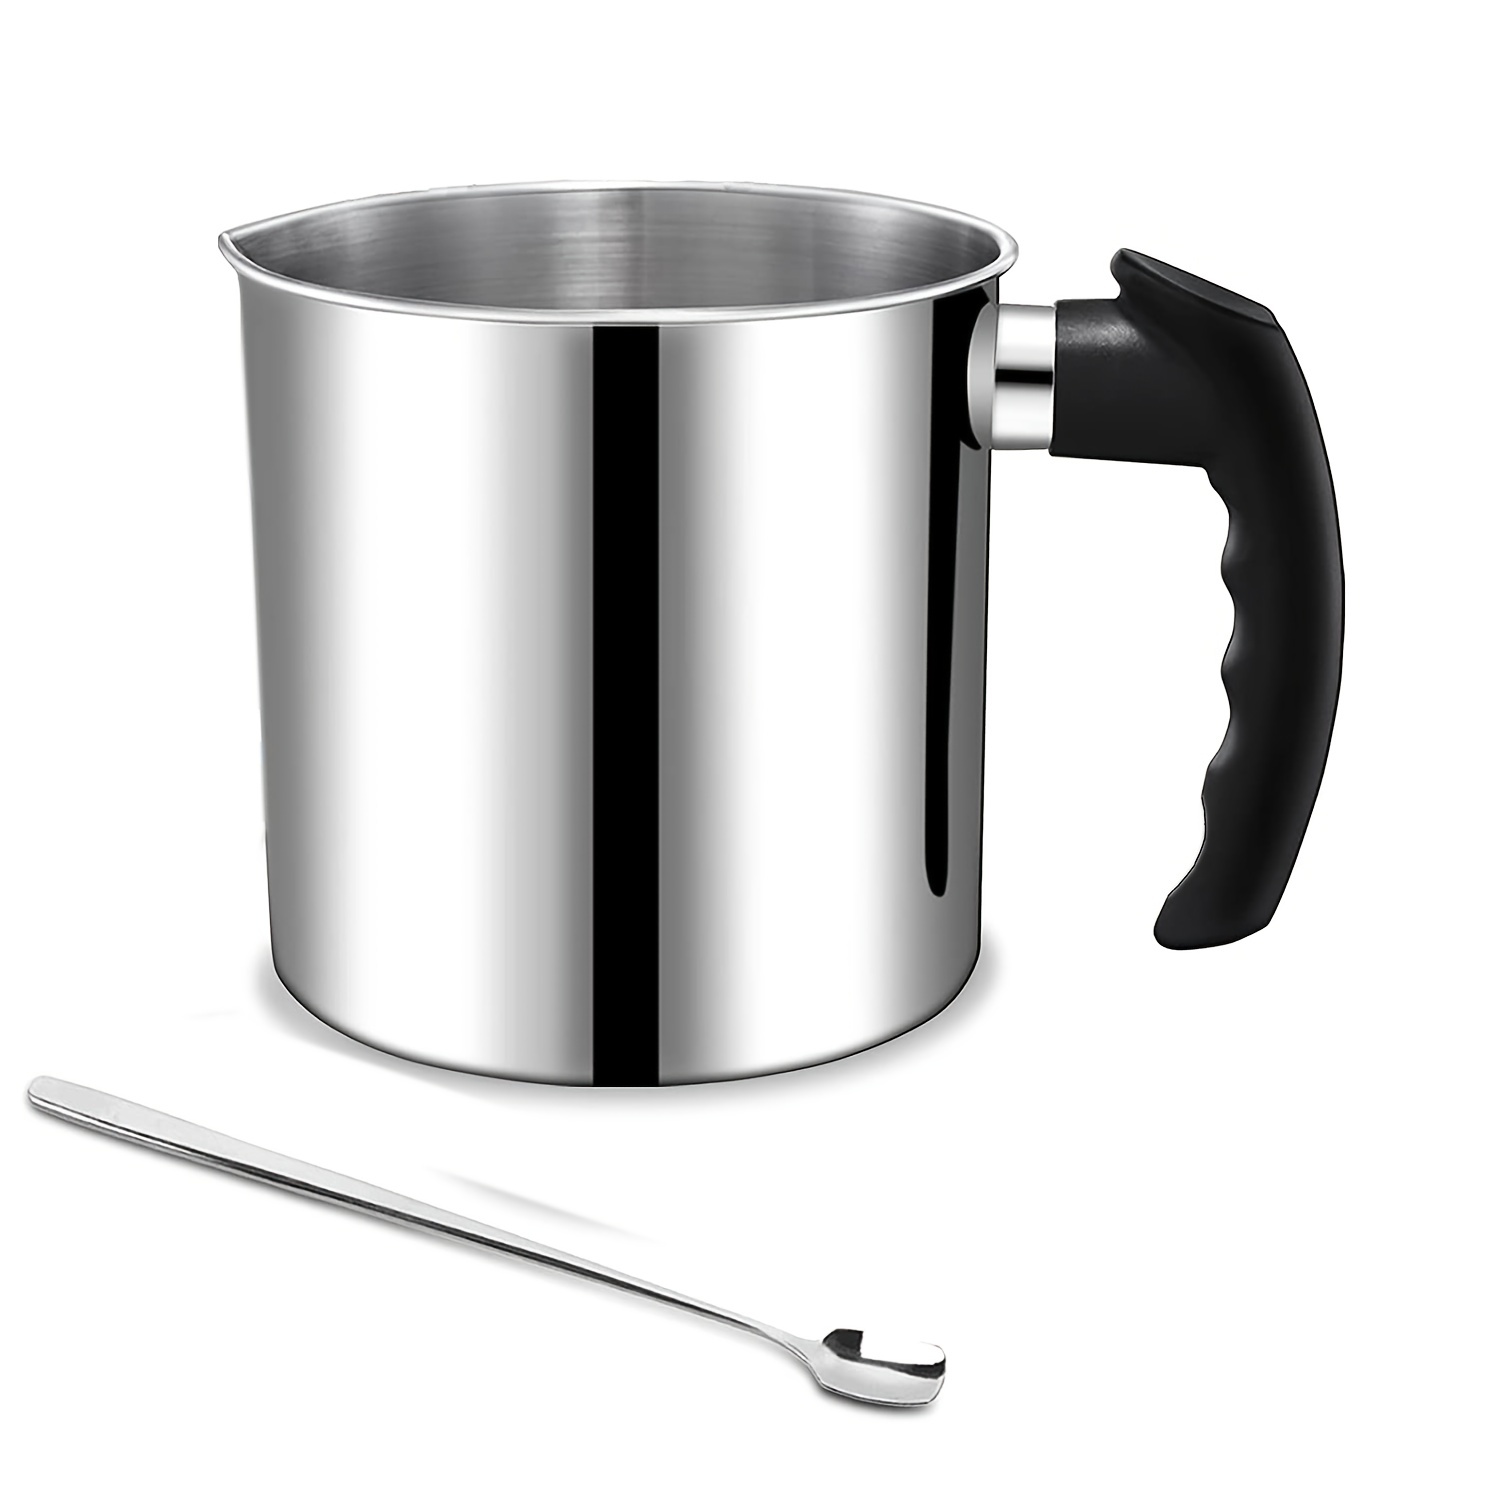 Candle Making Pouring Pot, Boiler Wax Melting Pot With Spoon, 304